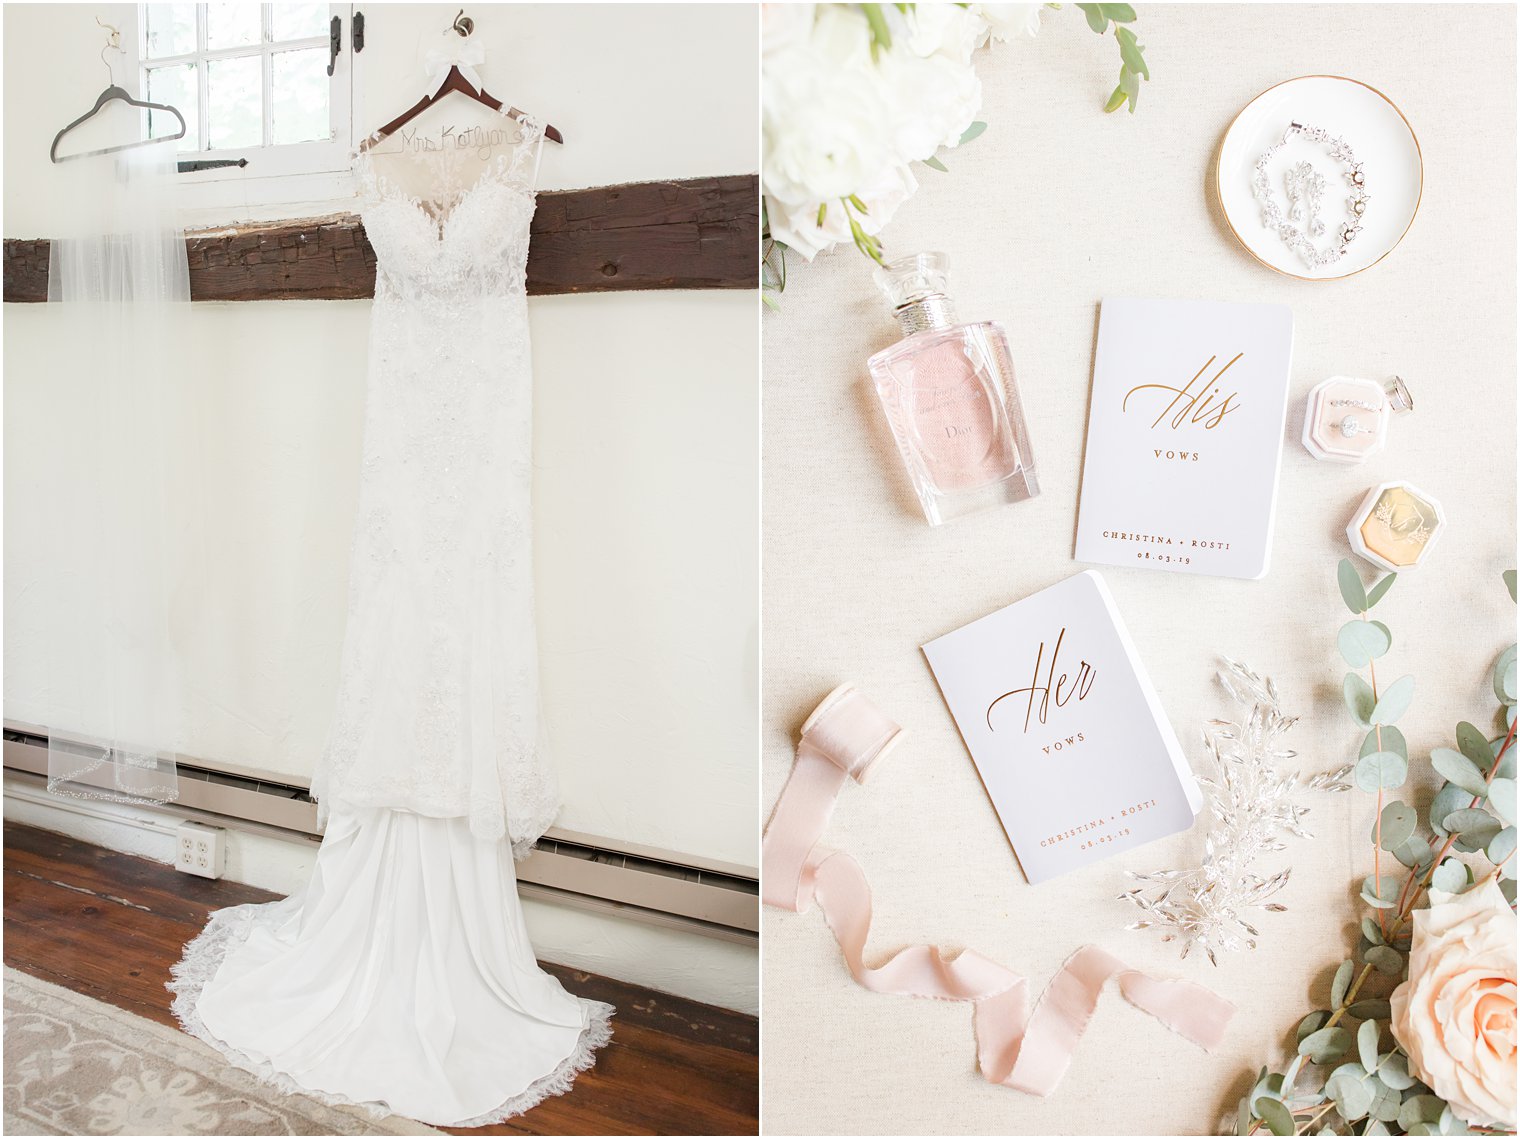 Wedding dress and vow books in Grain House at the Olde Mill Inn Wedding Photos 